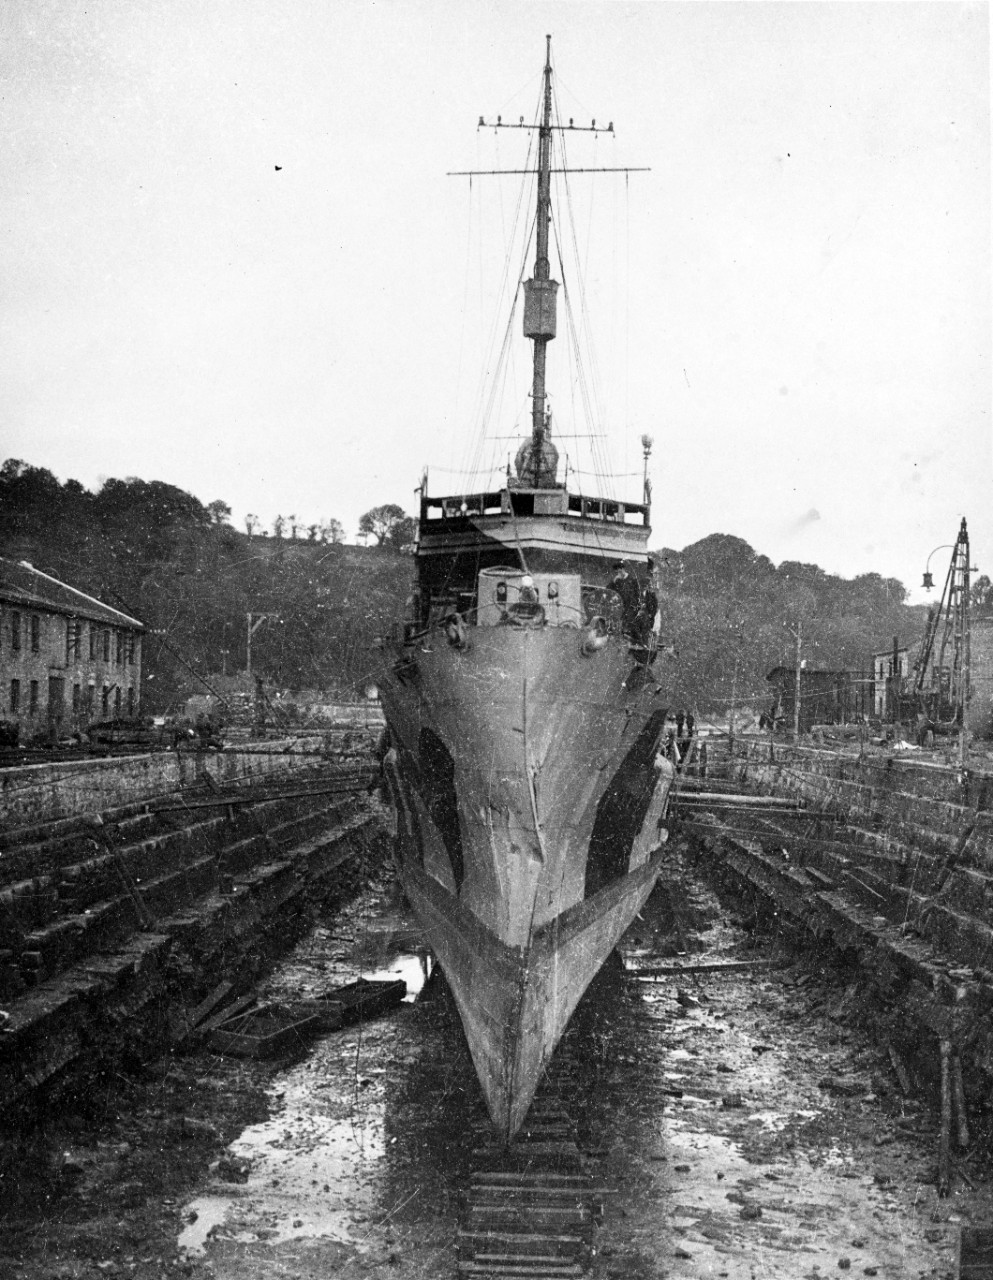 USS DAVIS (DD-65) in drydock at Queenstown, Ireland, for repair of collision damage to bow, 1918